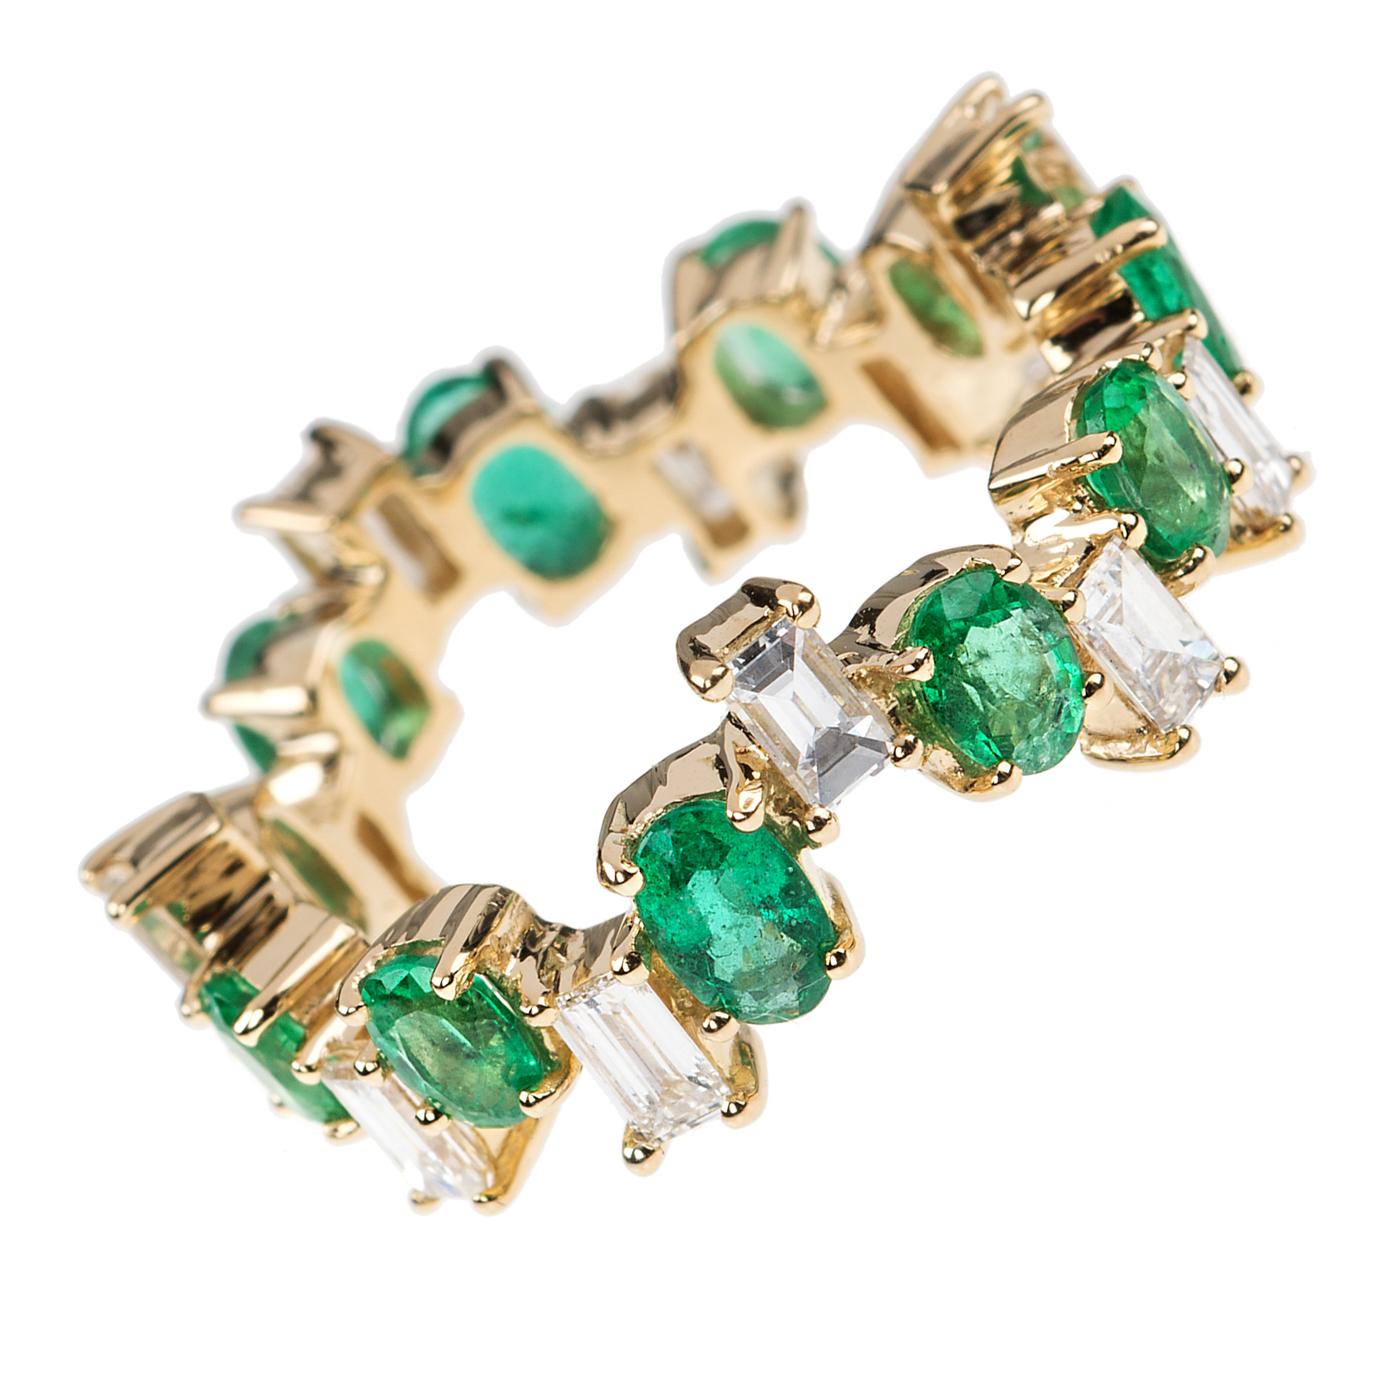 Nikos Koulis Eden Collection K18 yellow gold ring band with 2.04 cts emeralds and 1.09 cts white diamonds
Ring size: 53